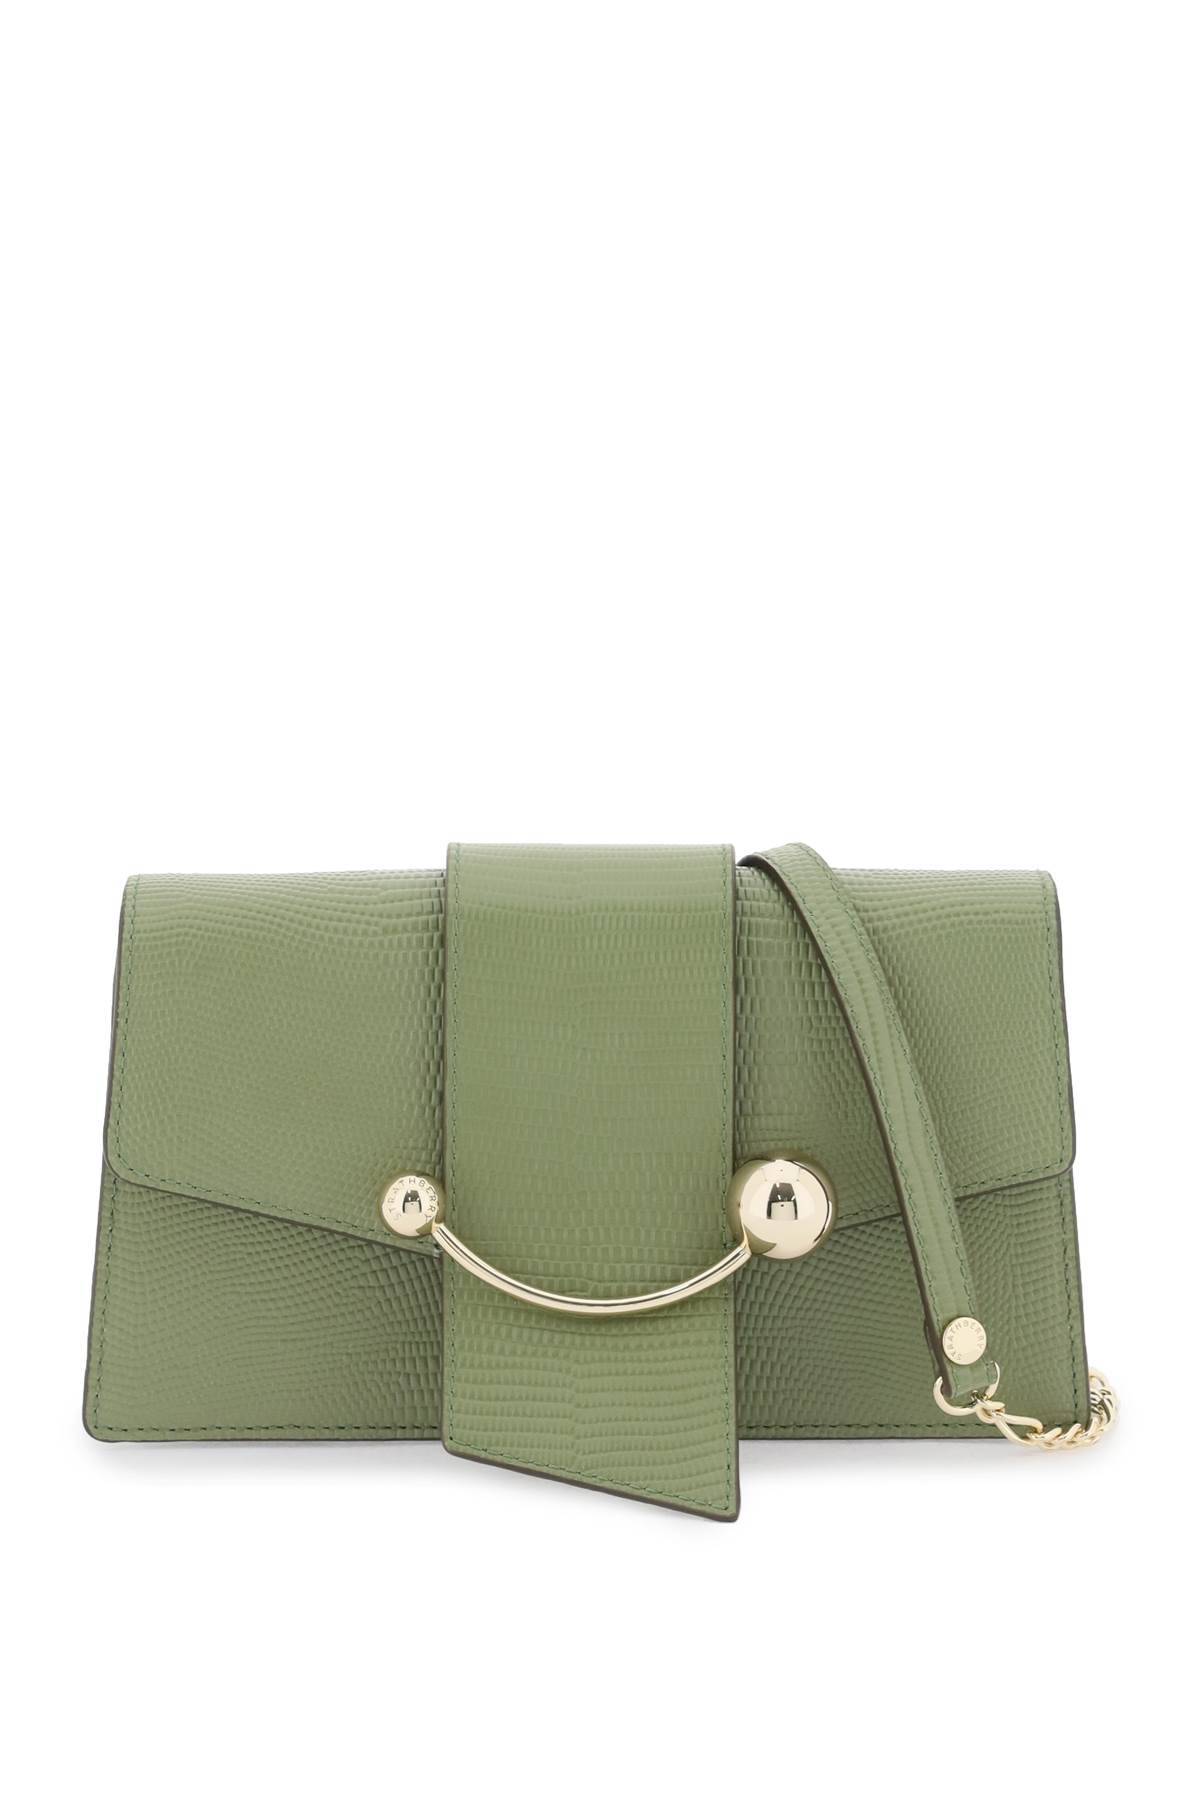 Strathberry STRATHBERRY 'crescent on a chain' crossbody mini bag